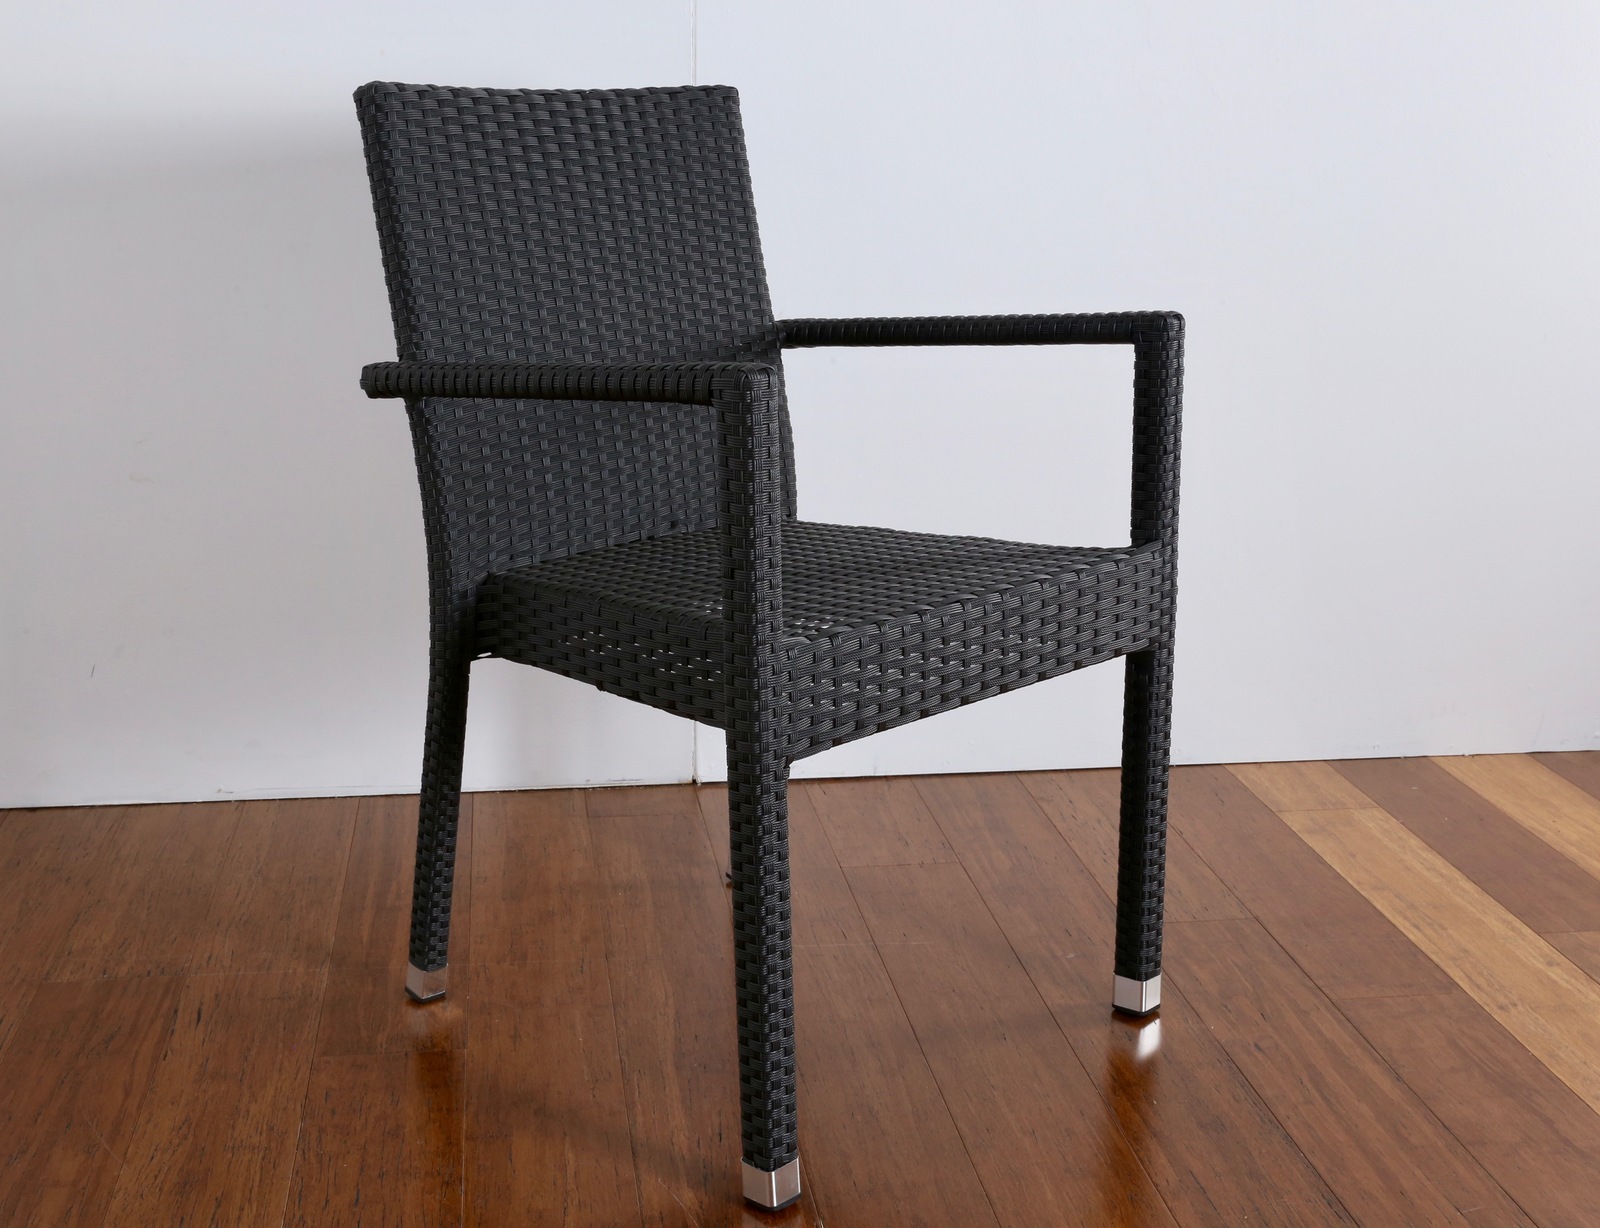 Black Synthetic Rattan Outdoor Dining Chair Furniture Brisbane